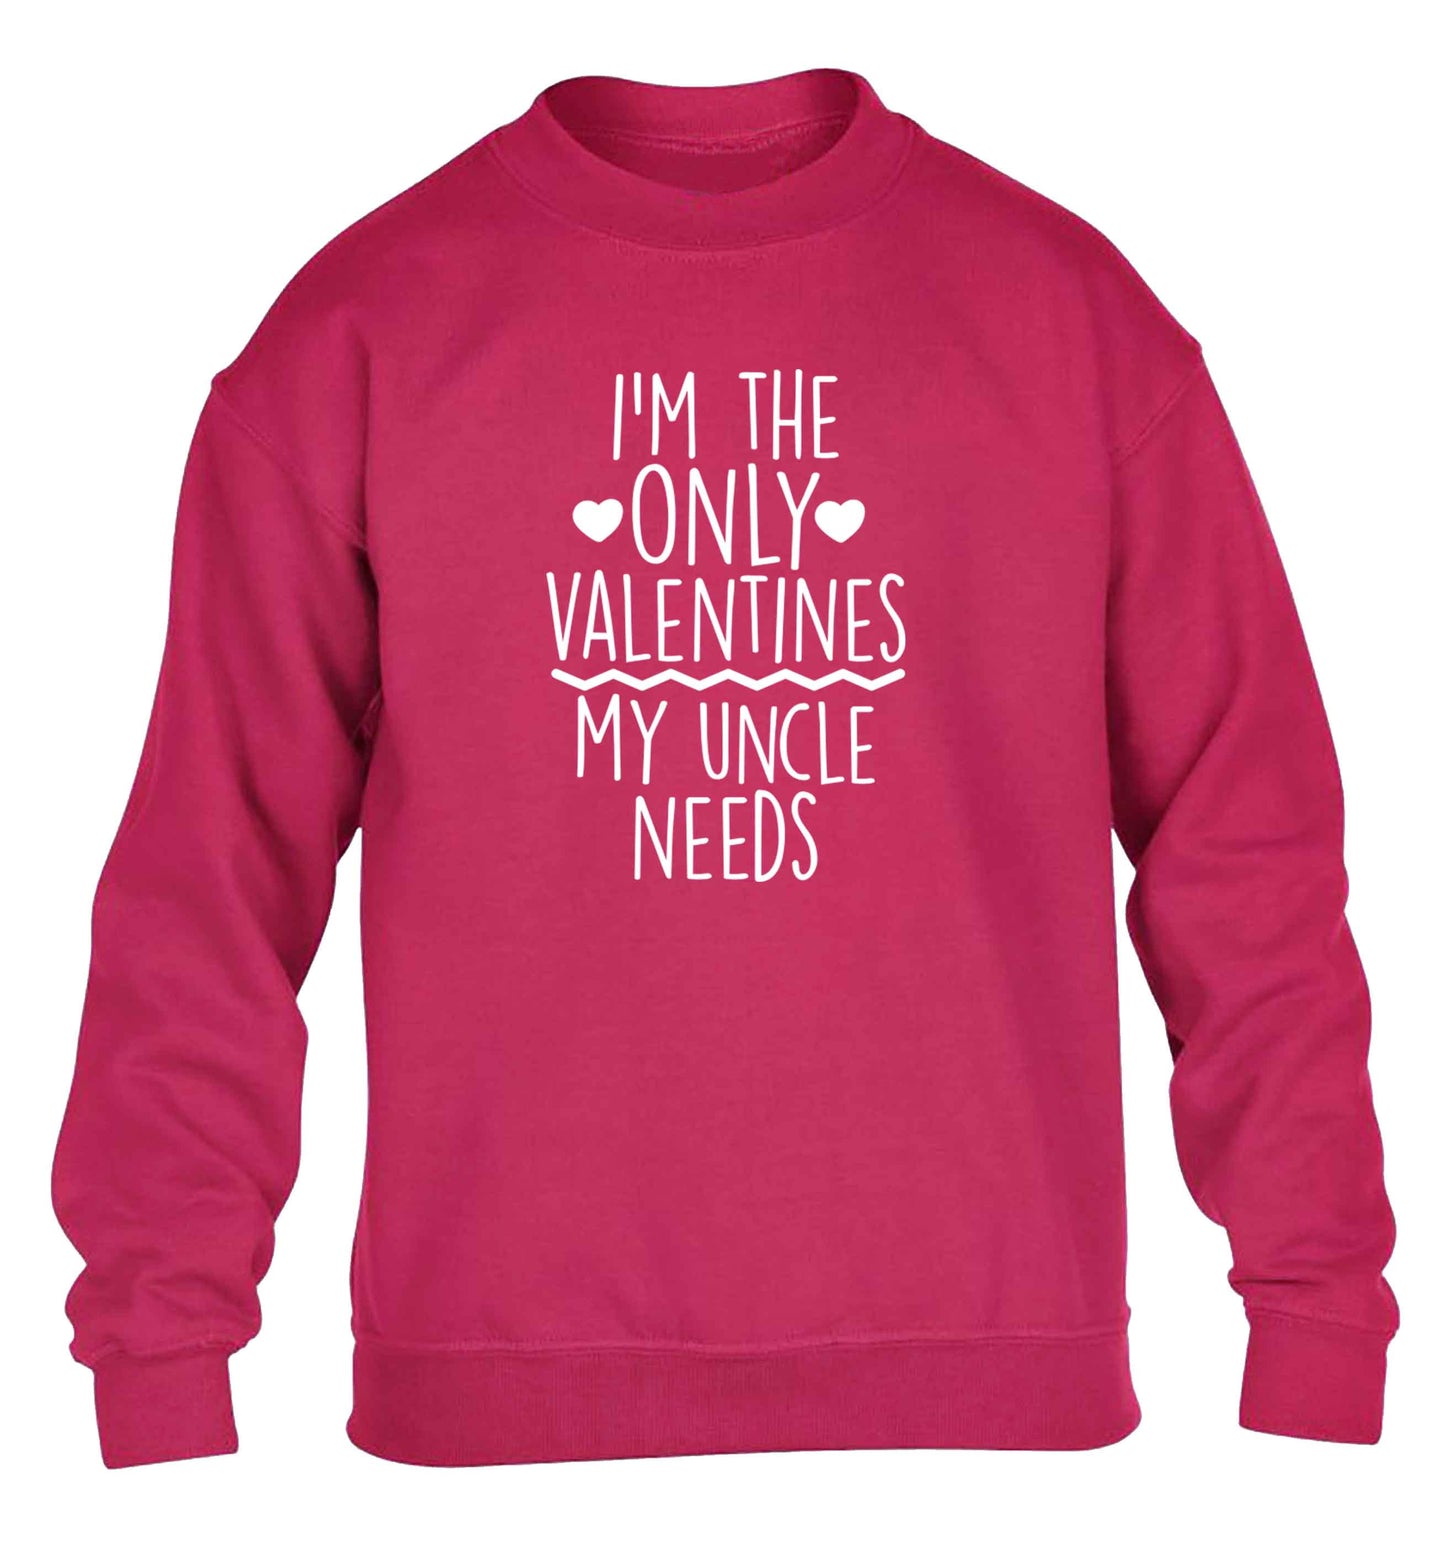 I'm the only valentines my uncle needs children's pink sweater 12-13 Years